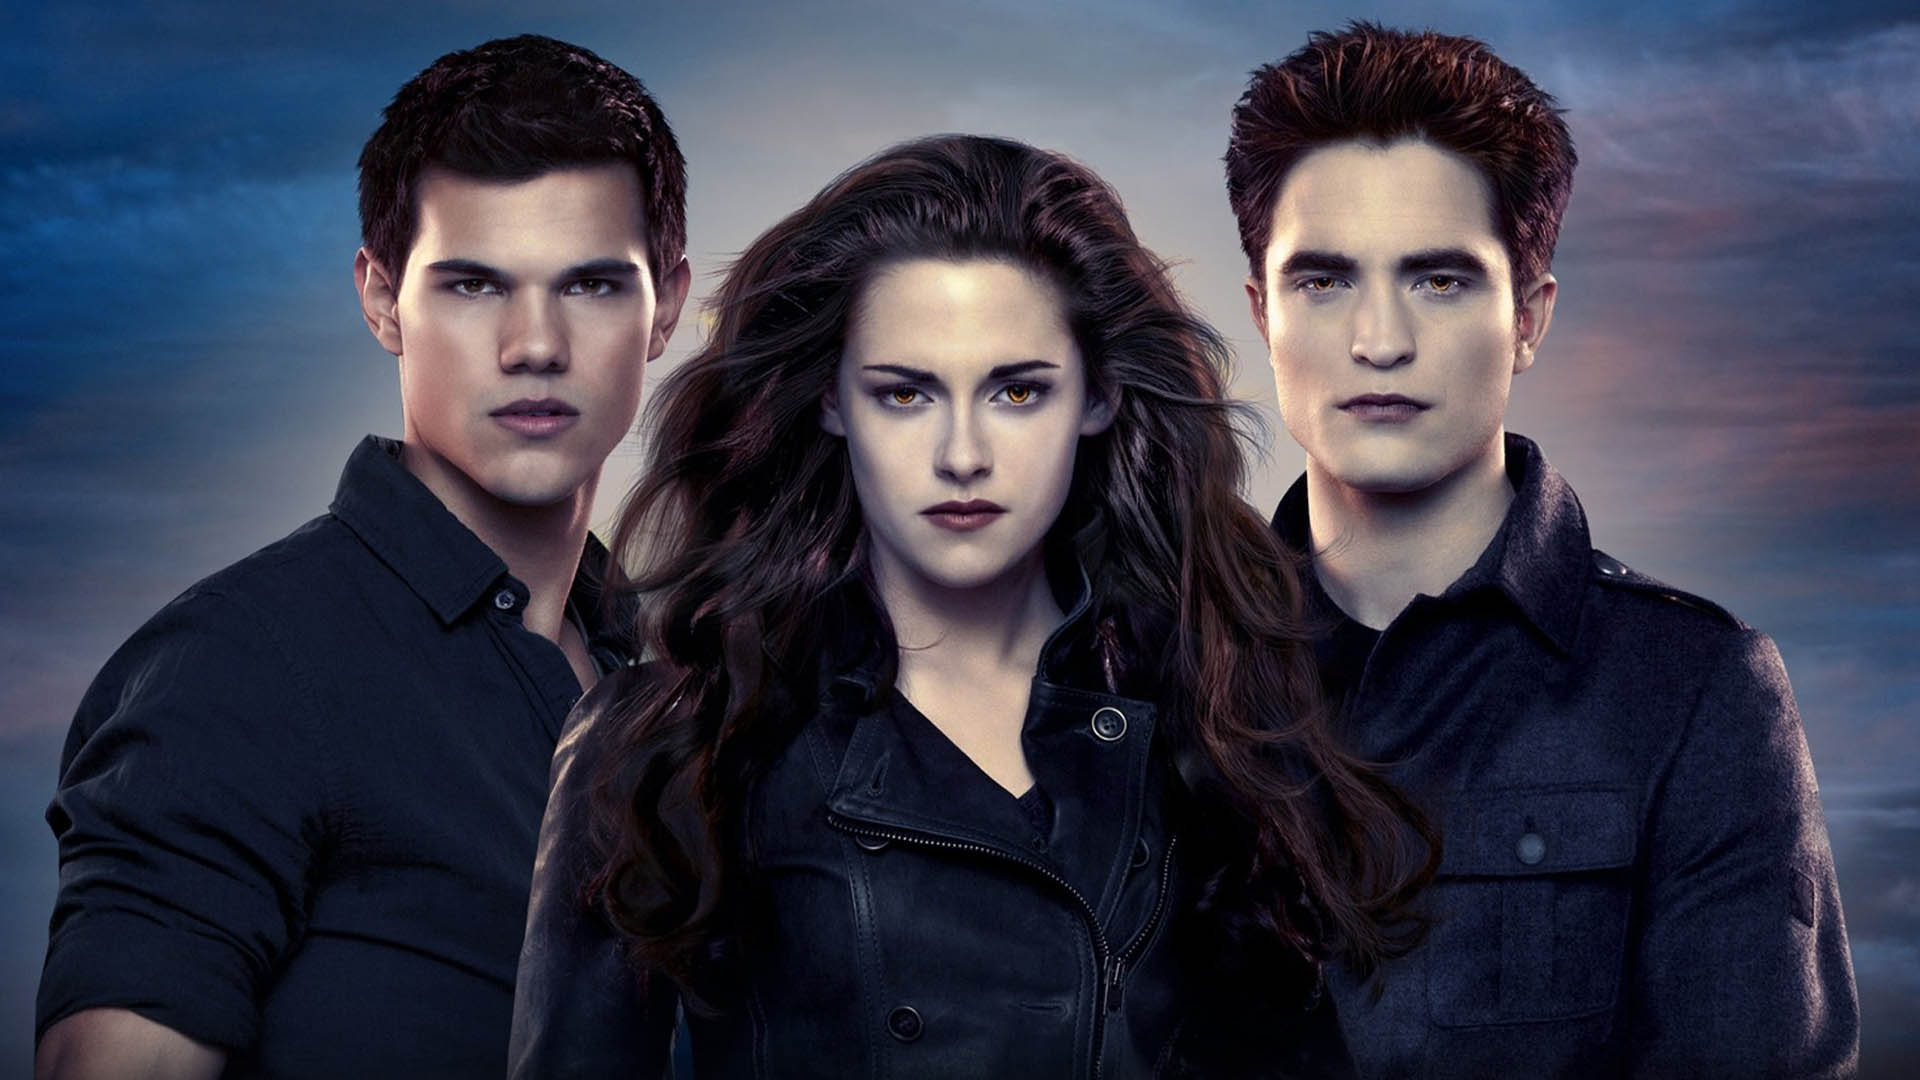 The main characters of The Twilight movie series